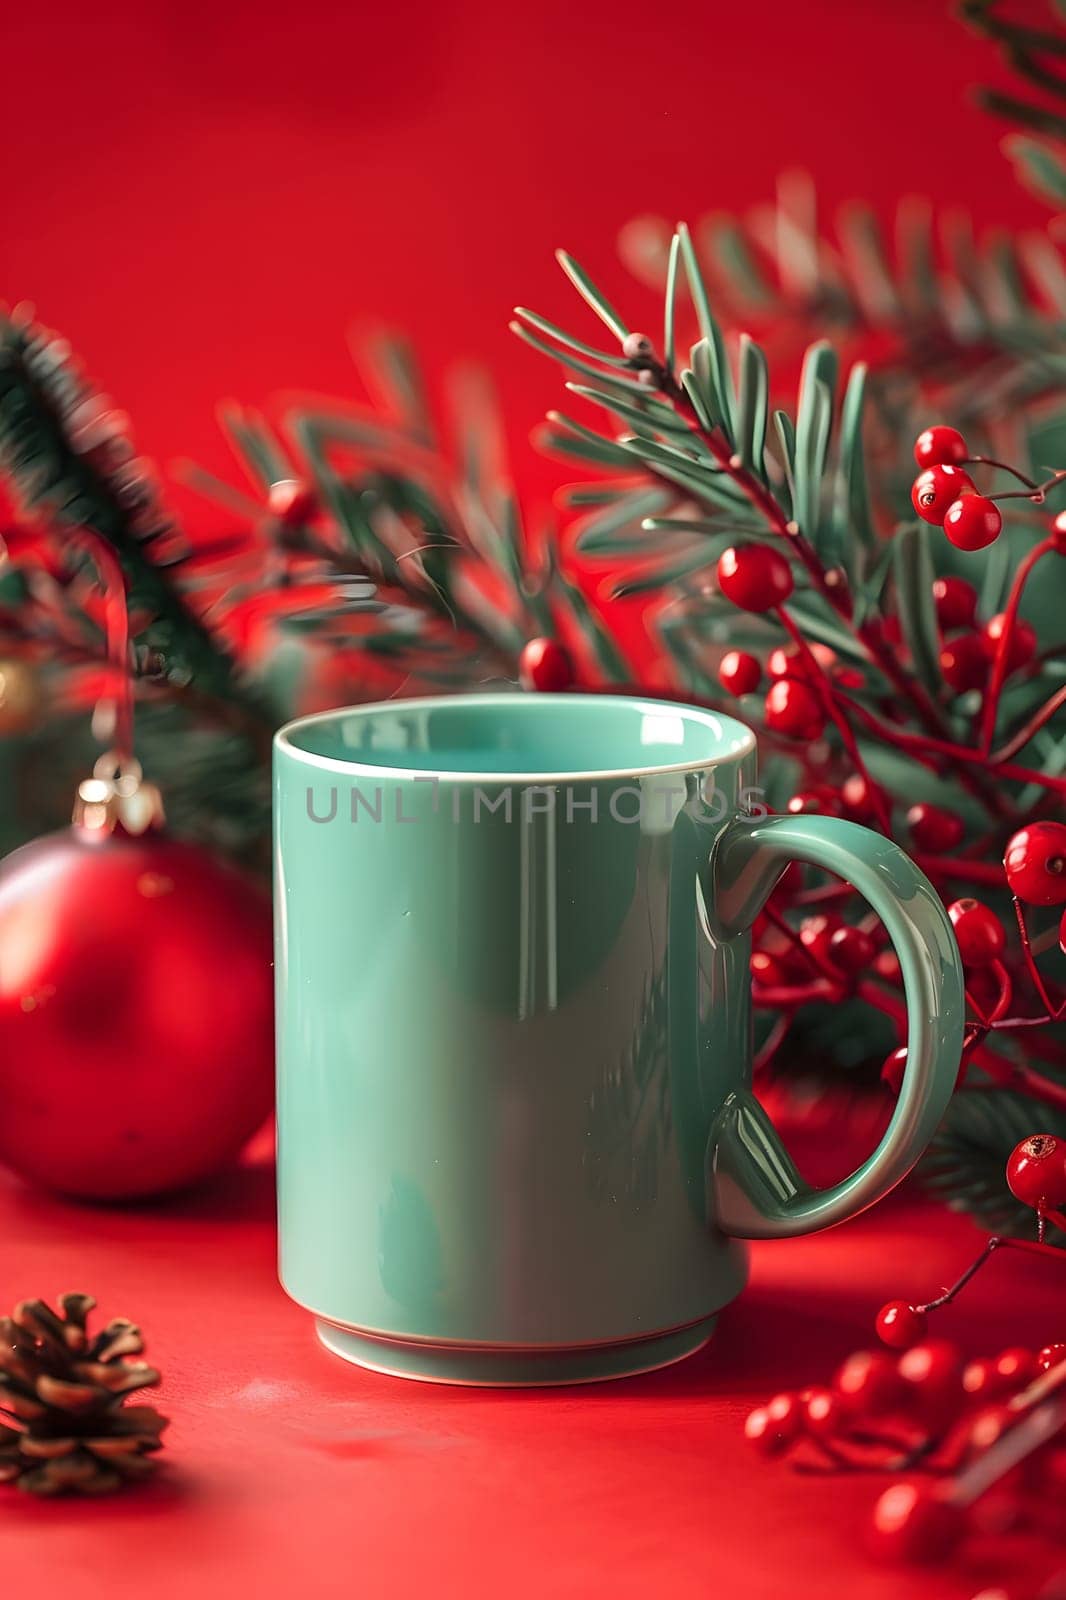 A Cup of green coffee is placed on a red Table next to Christmas decorations, including holiday ornaments and Christmas ornaments